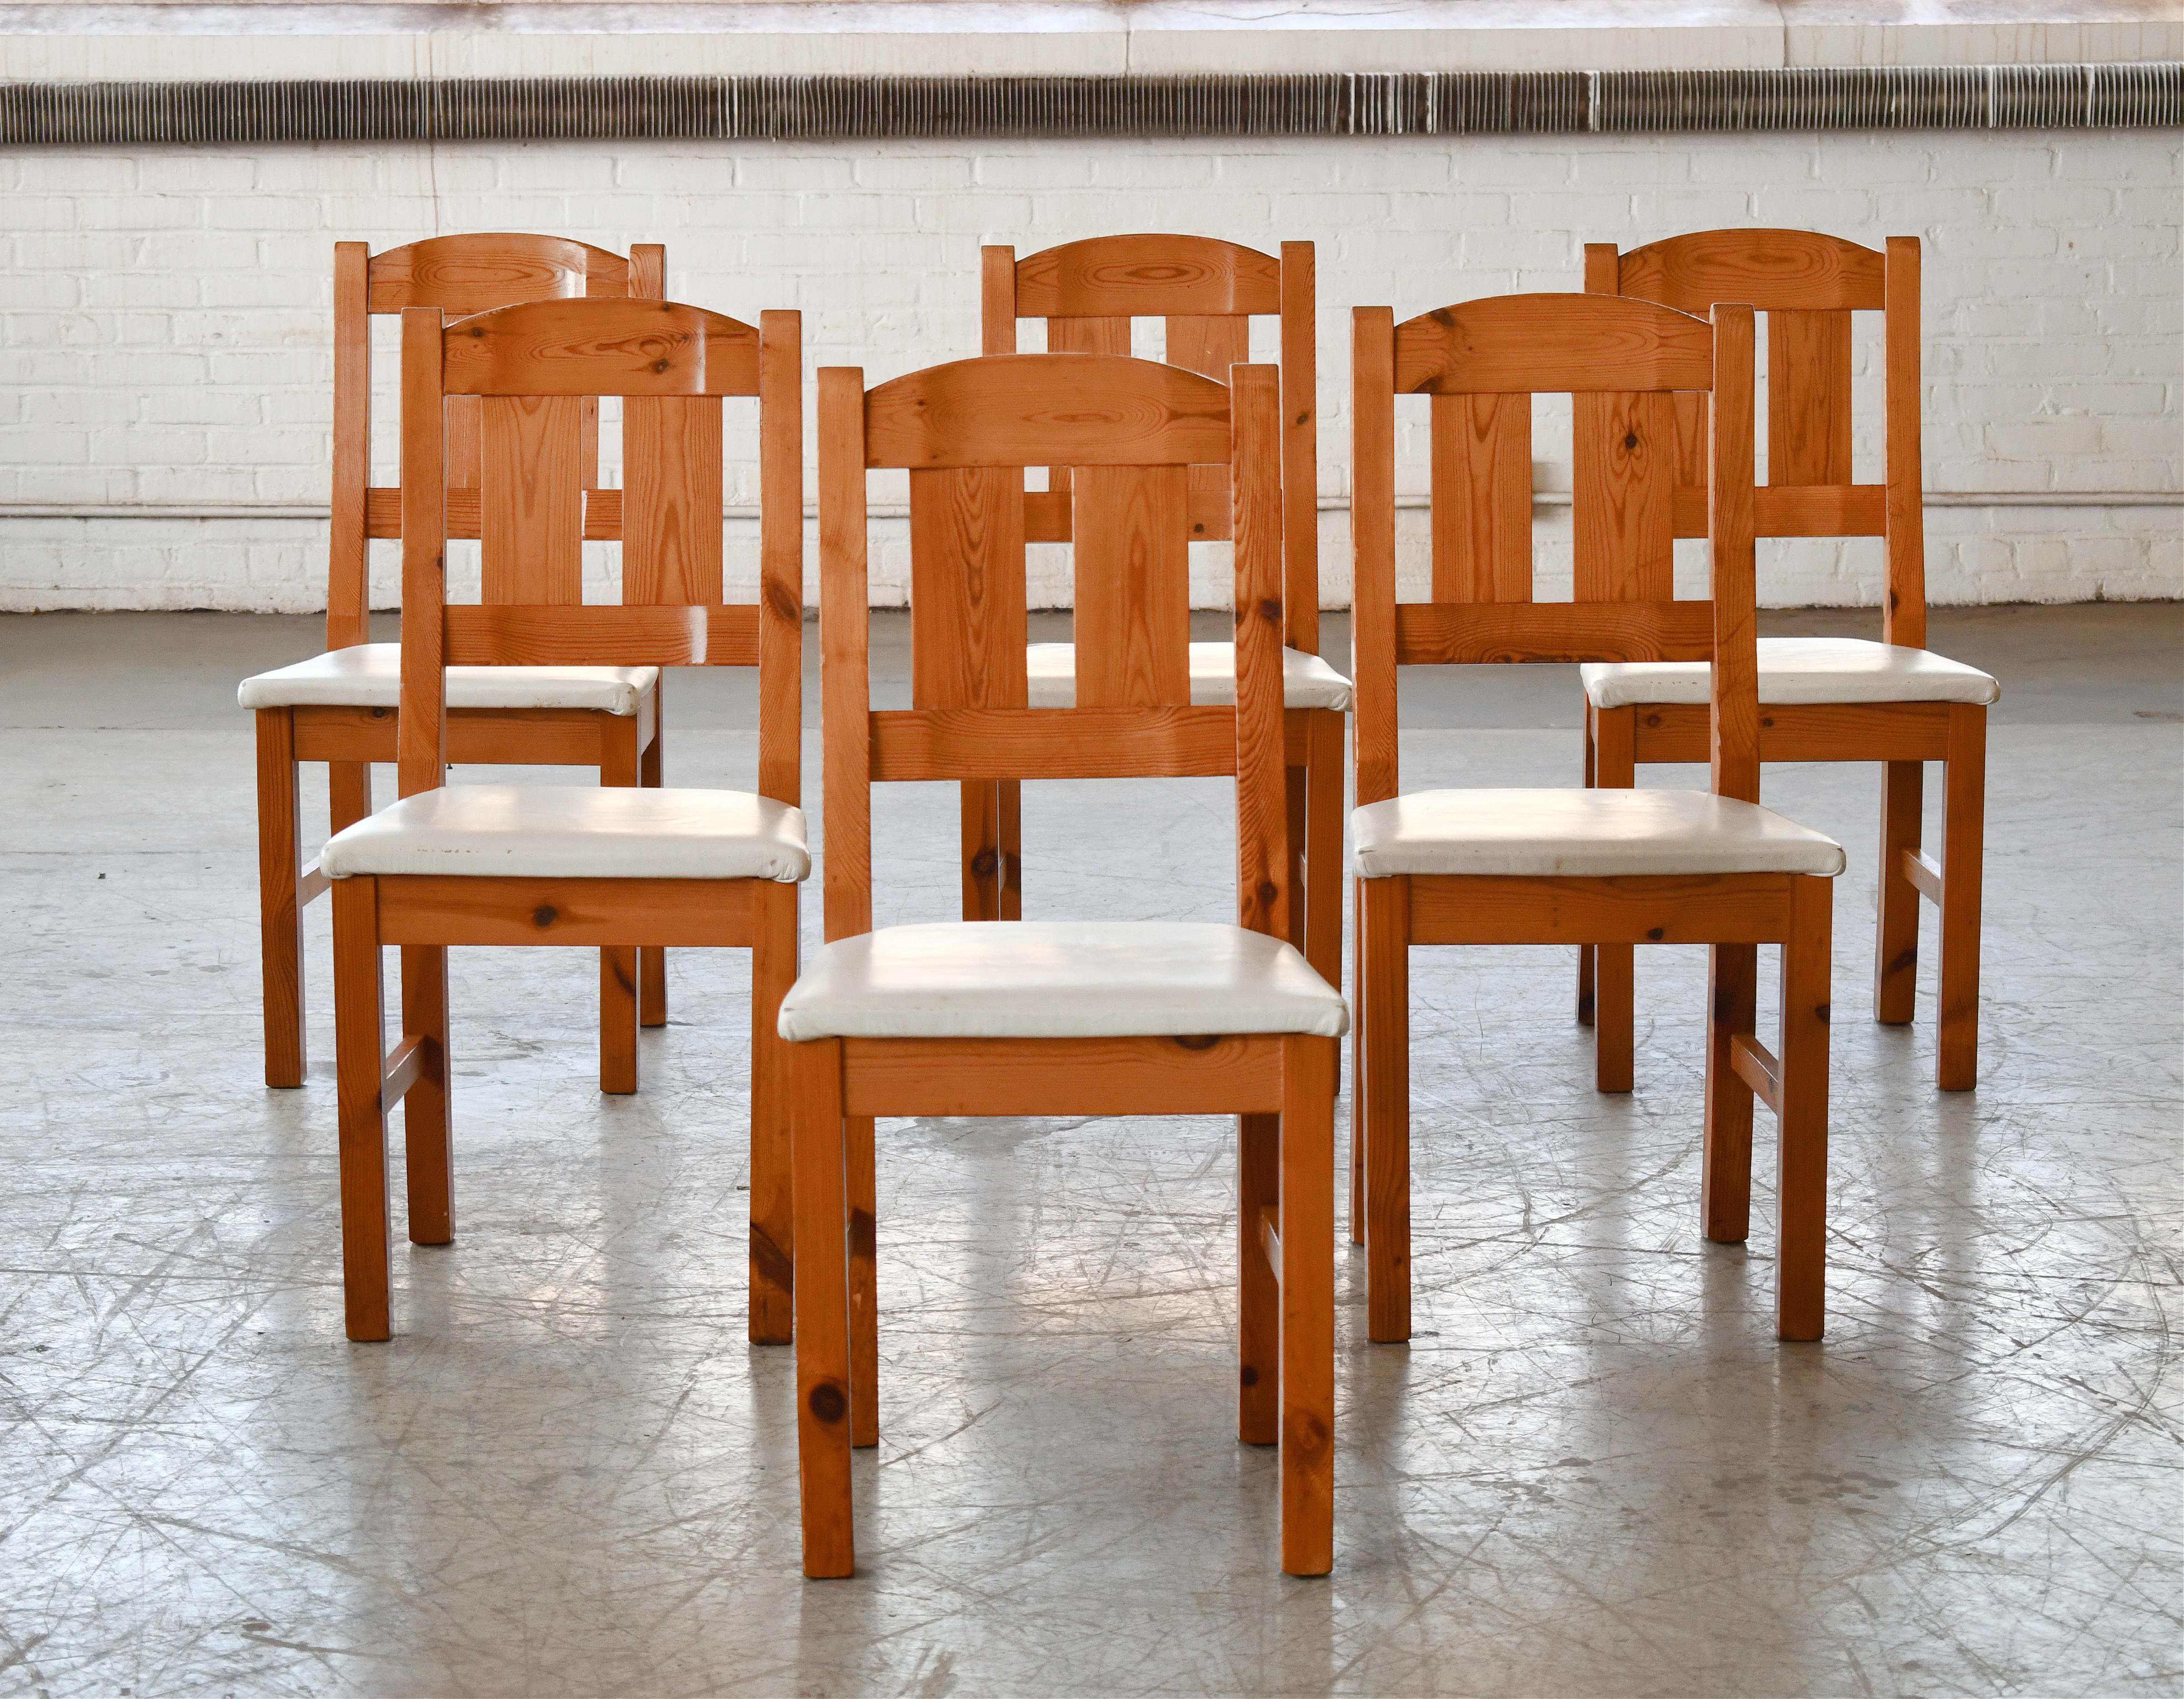 Great Danish dining chairs made sometime in the 1930's. Rustic and very elegant in their simplicity very reminiscent of the famous chairs made by Kaare Klint at the peak of functionalism.  Made from oak and the seats have been reupholstered in a